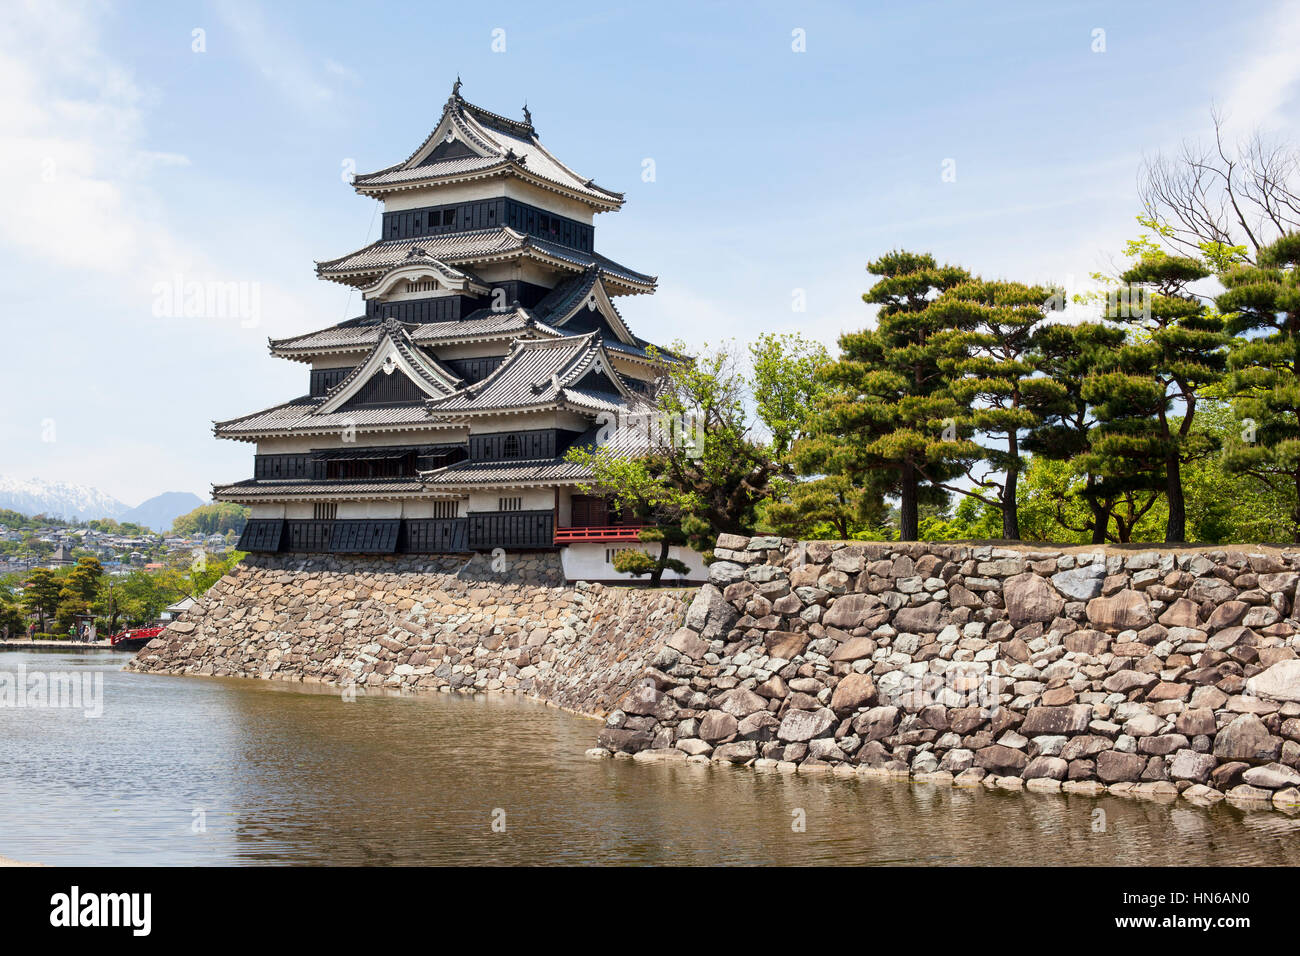 Matsumoto, Japan - May 13, 2012: The black and white wooden keep of Matsumoto castle with stone block foundations and walls surrounded by a moat. The  Stock Photo